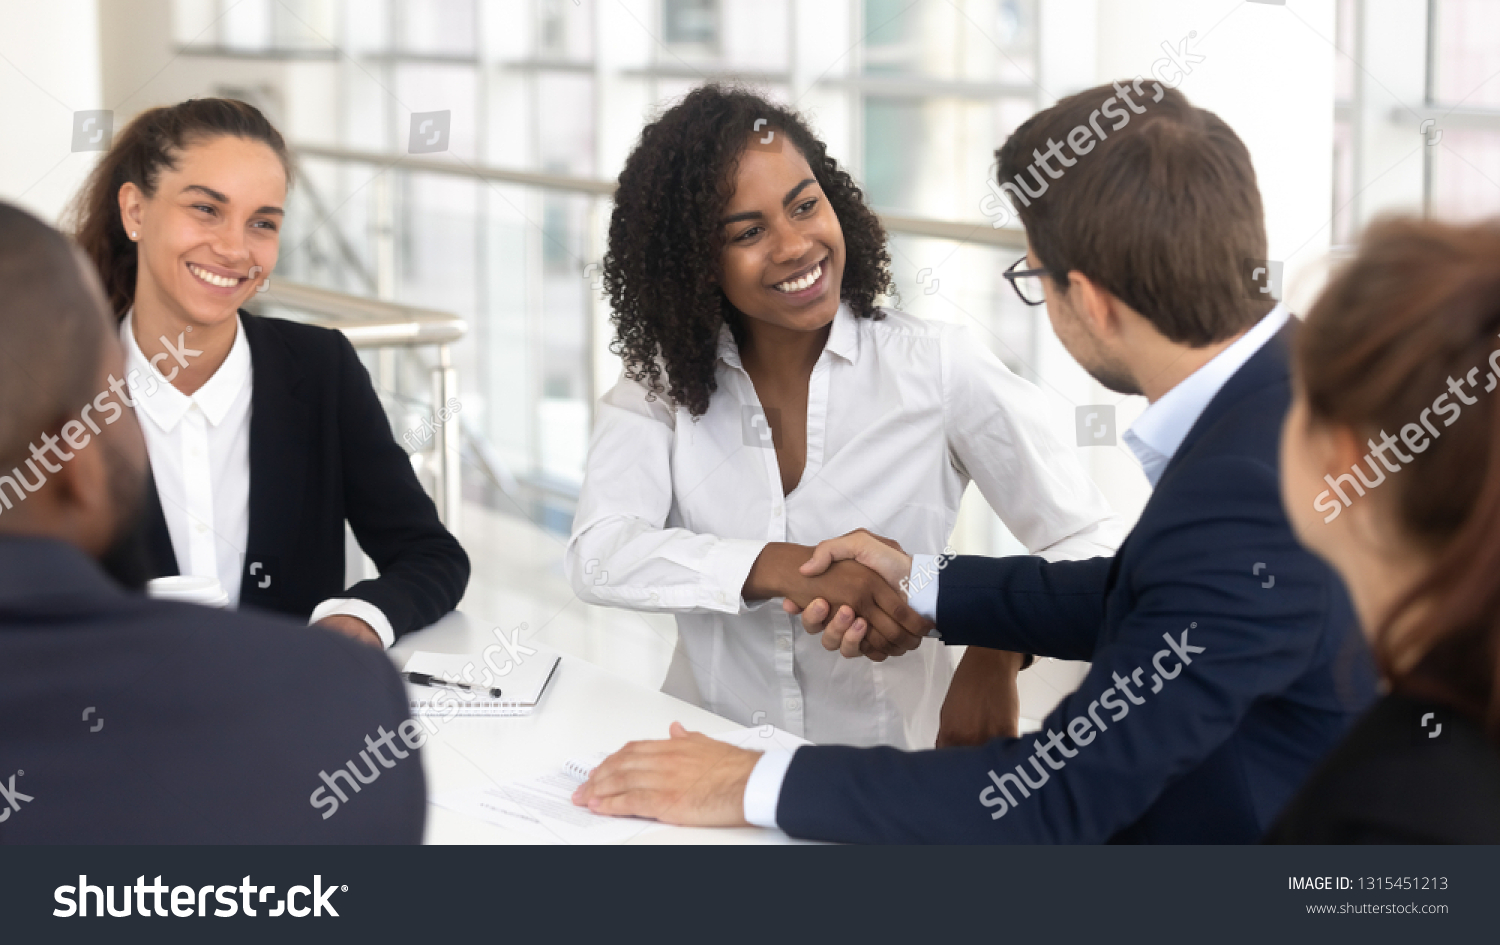 Multiracial businessman businesswoman shake hands starting collaboration at group negotiations, positive people gathered at modern office boardroom, partnership teamwork and business etiquette concept #1315451213